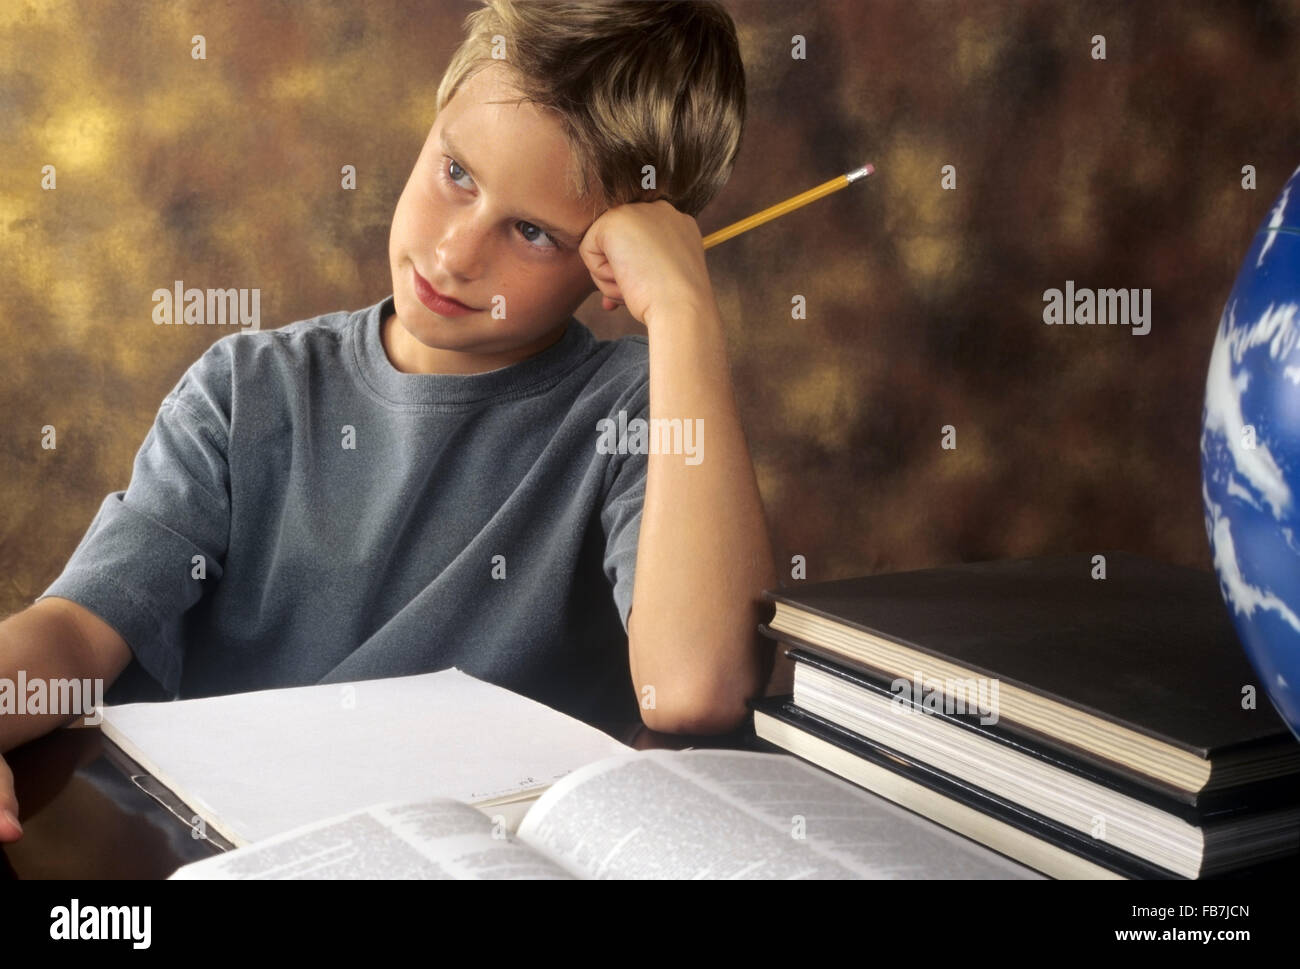 frustrated boy refuses to do homework Stock Photo